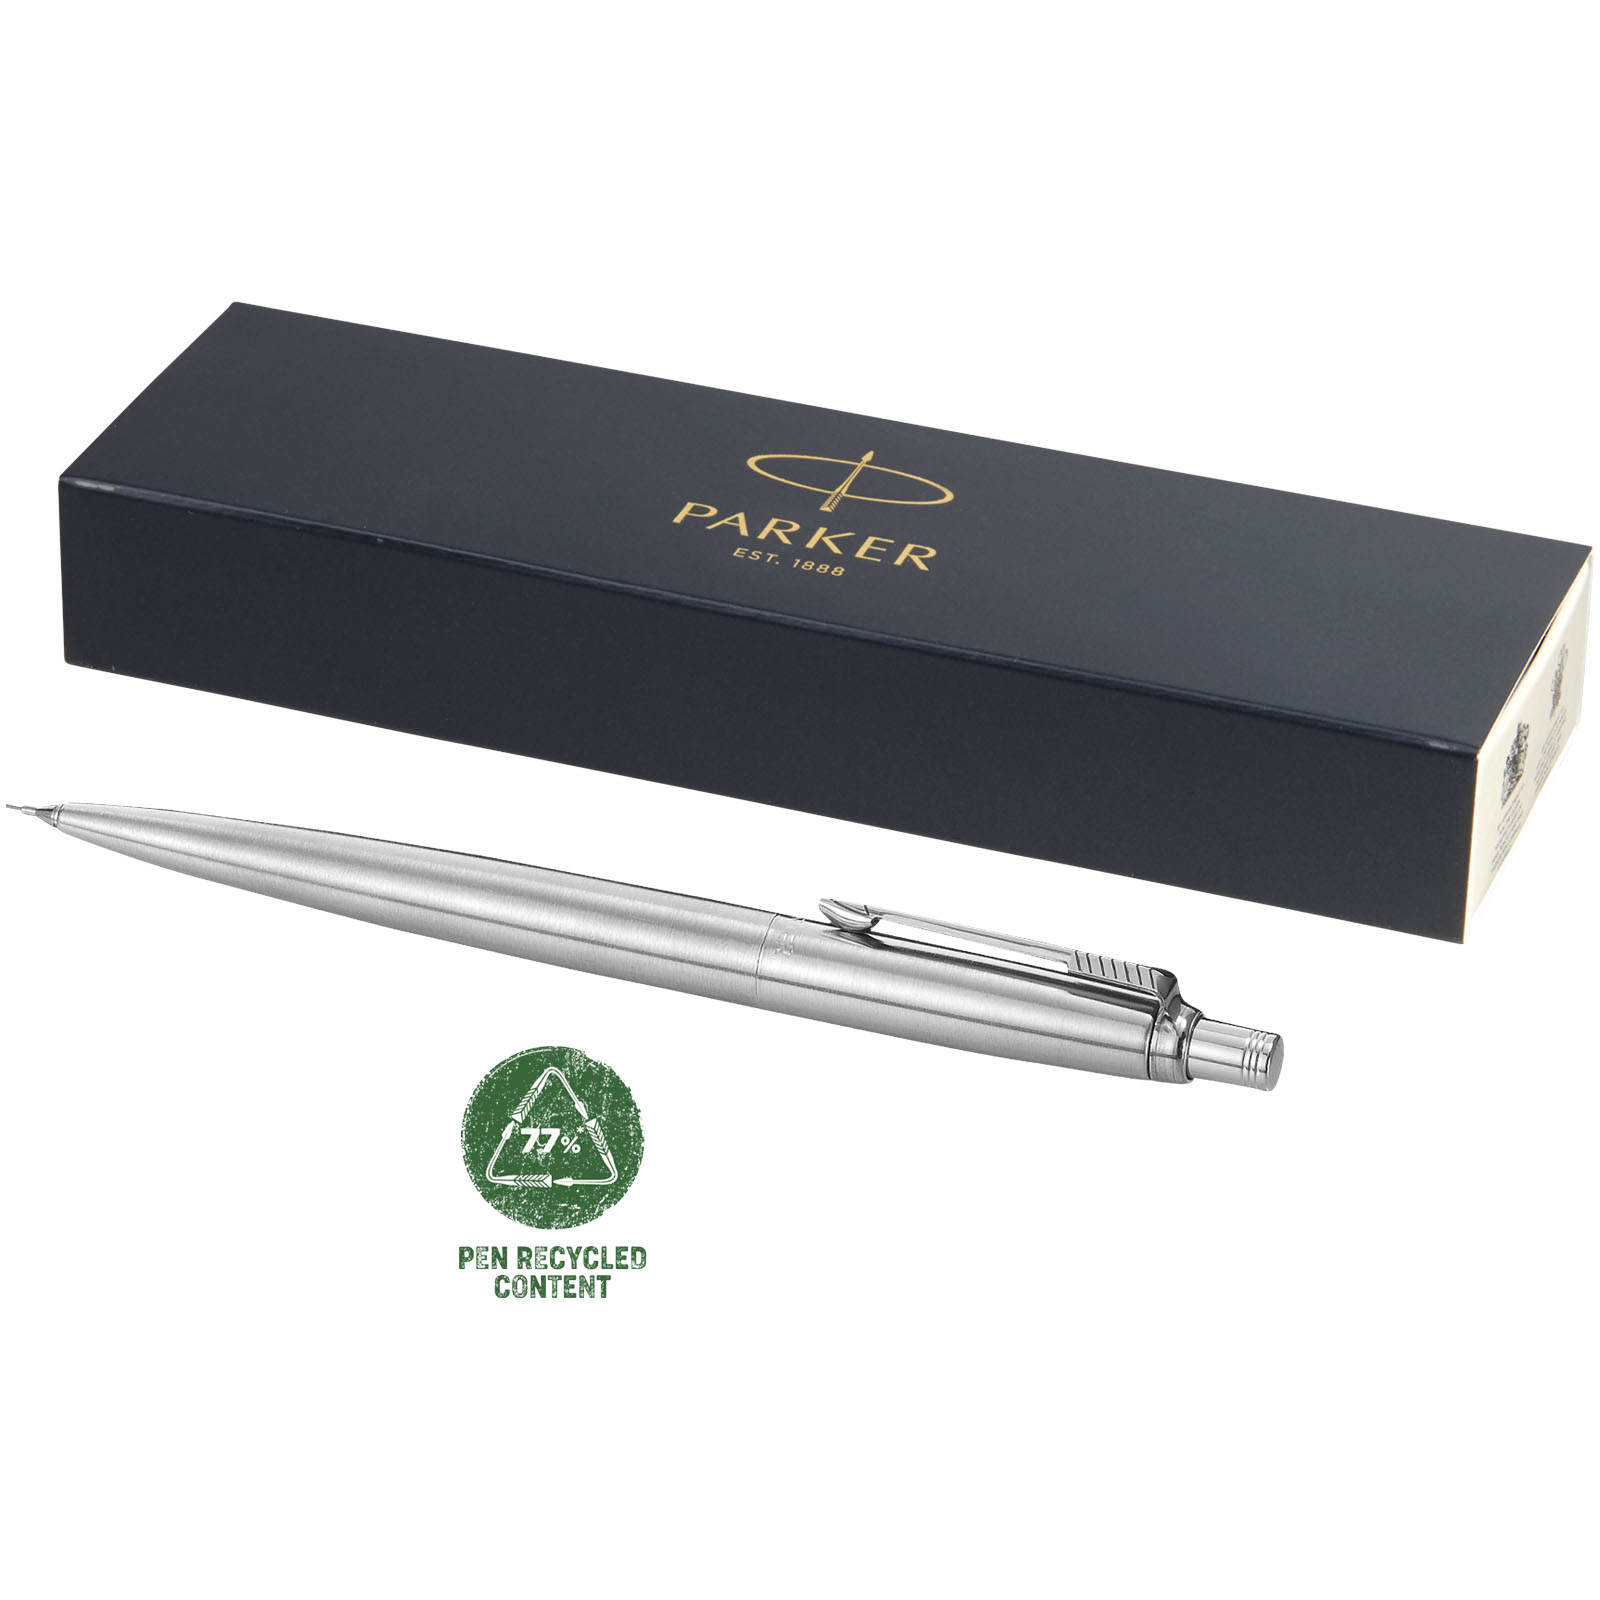 Pens & Writing - Parker Jotter mechanical pencil with built-in eraser